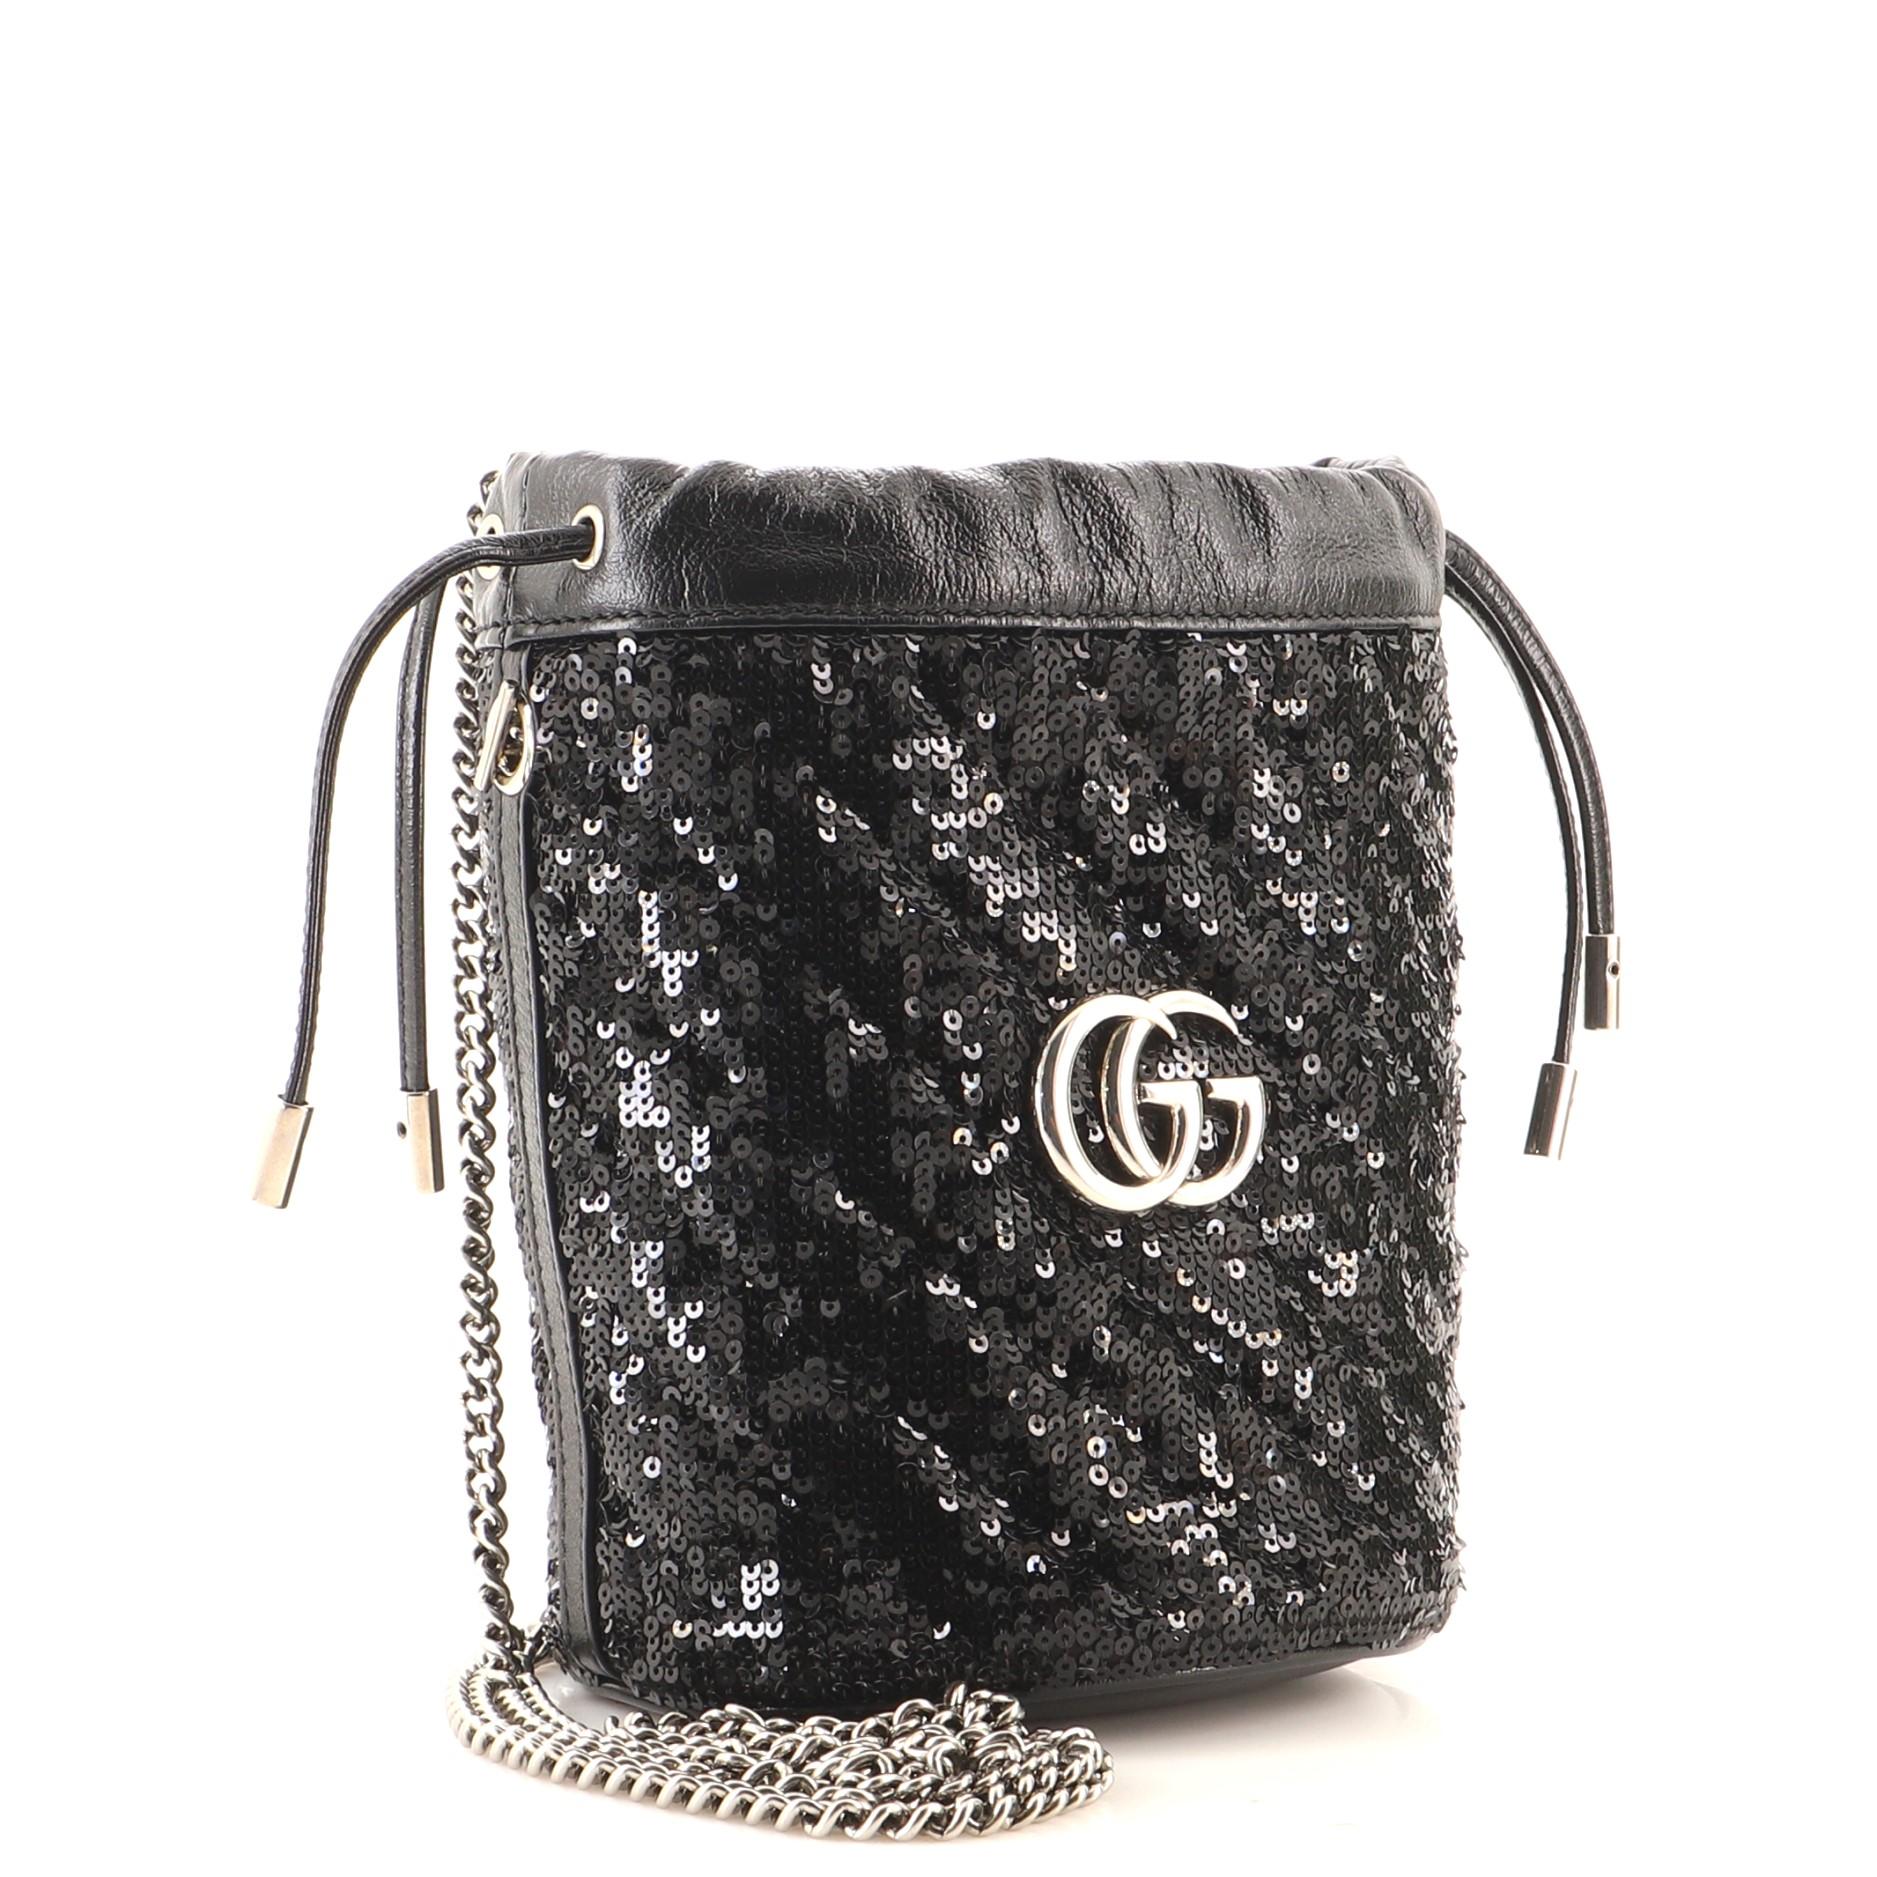 Black Gucci GG Marmont Bucket Bag Diagonal Quilted Sequins Mini